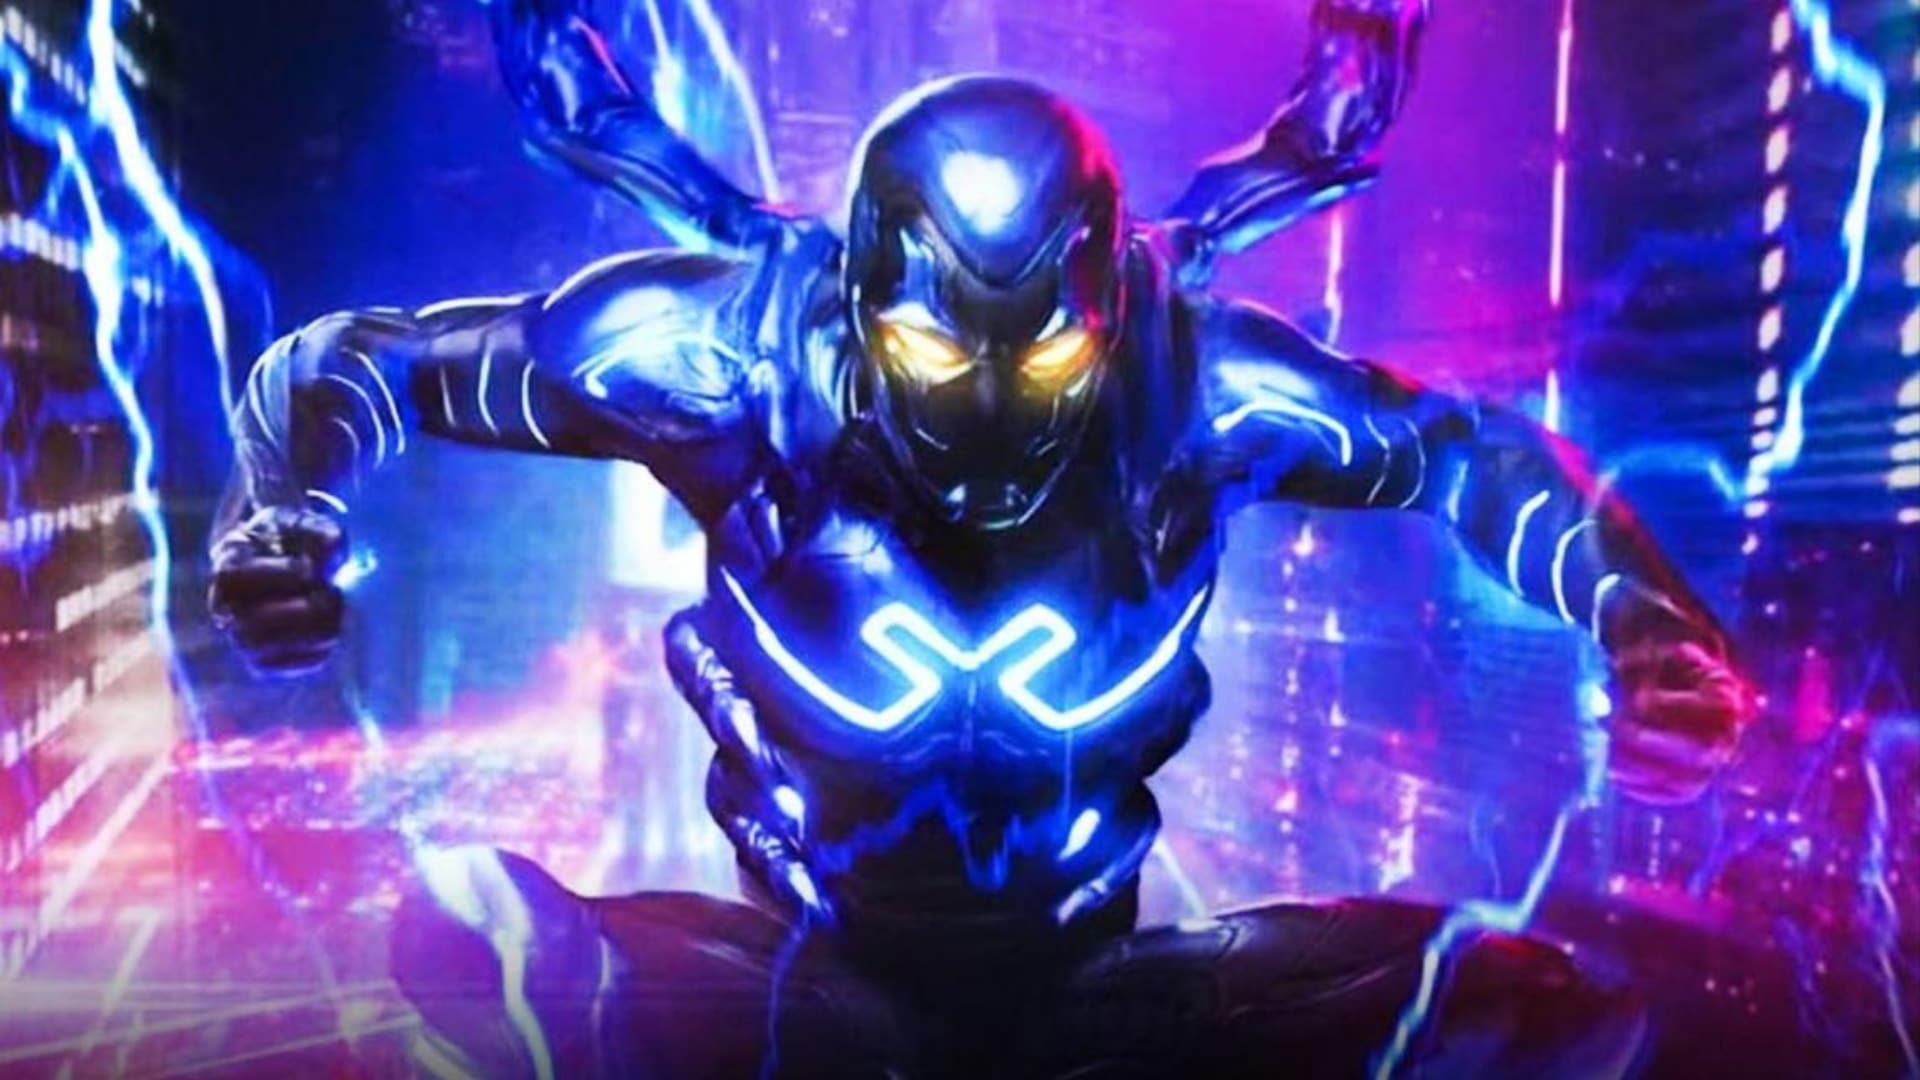 First-Look-at-DCs-Blue-Beetle-Movie-Costume-Revealed-on-GamersRD (1)